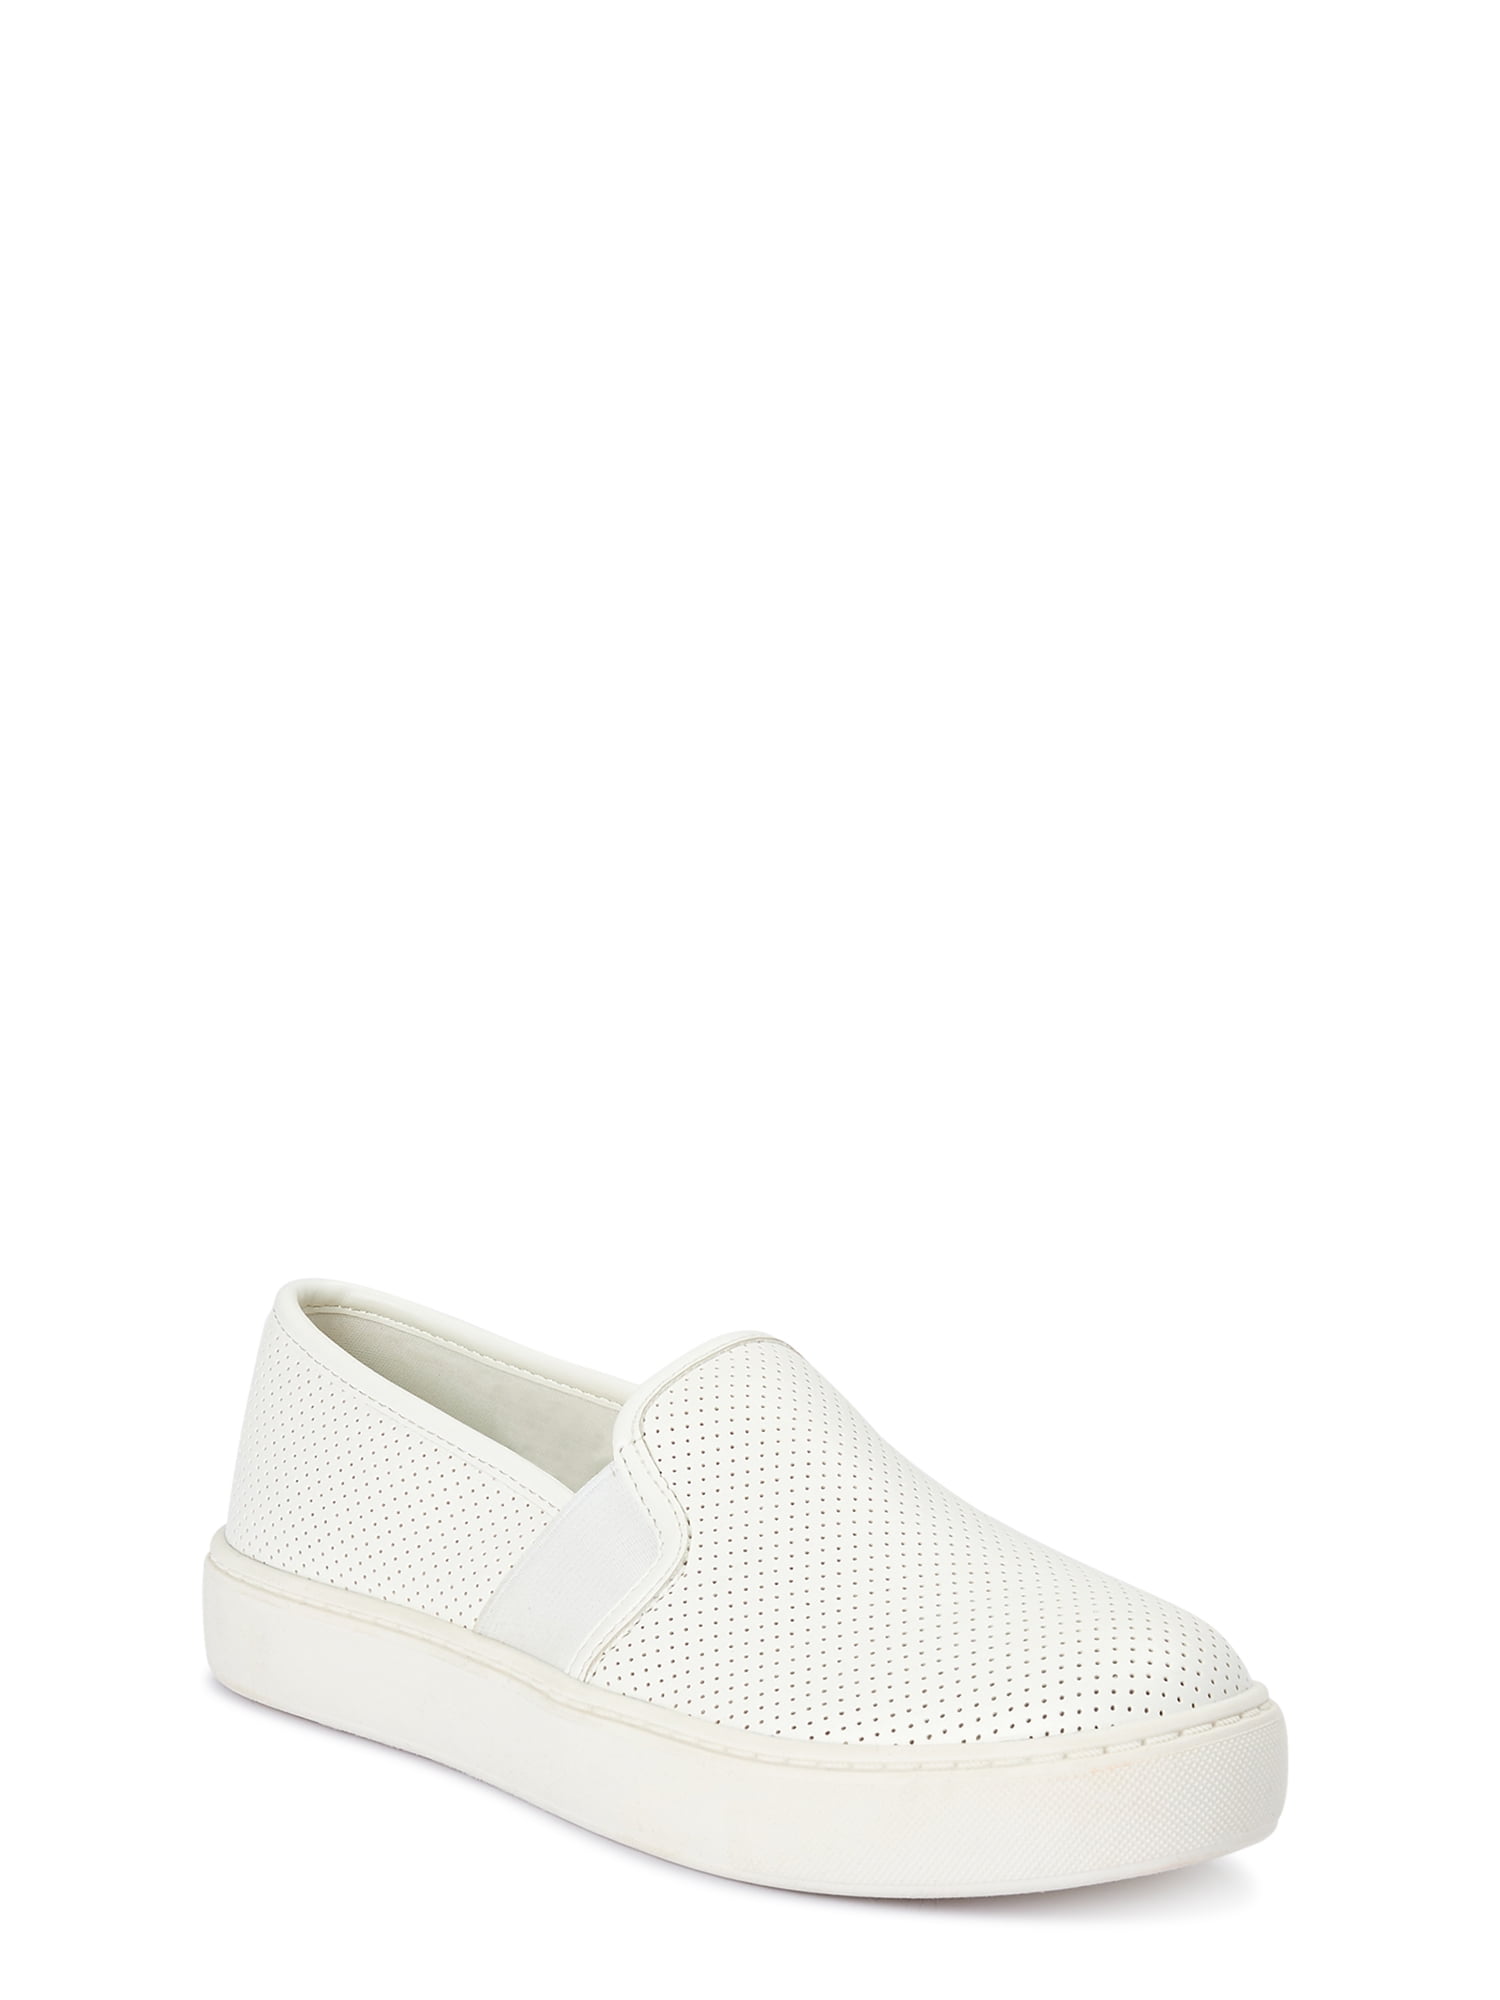 Time and Tru Women's Twin Gore Quilted Slip On Shoe - Walmart.com